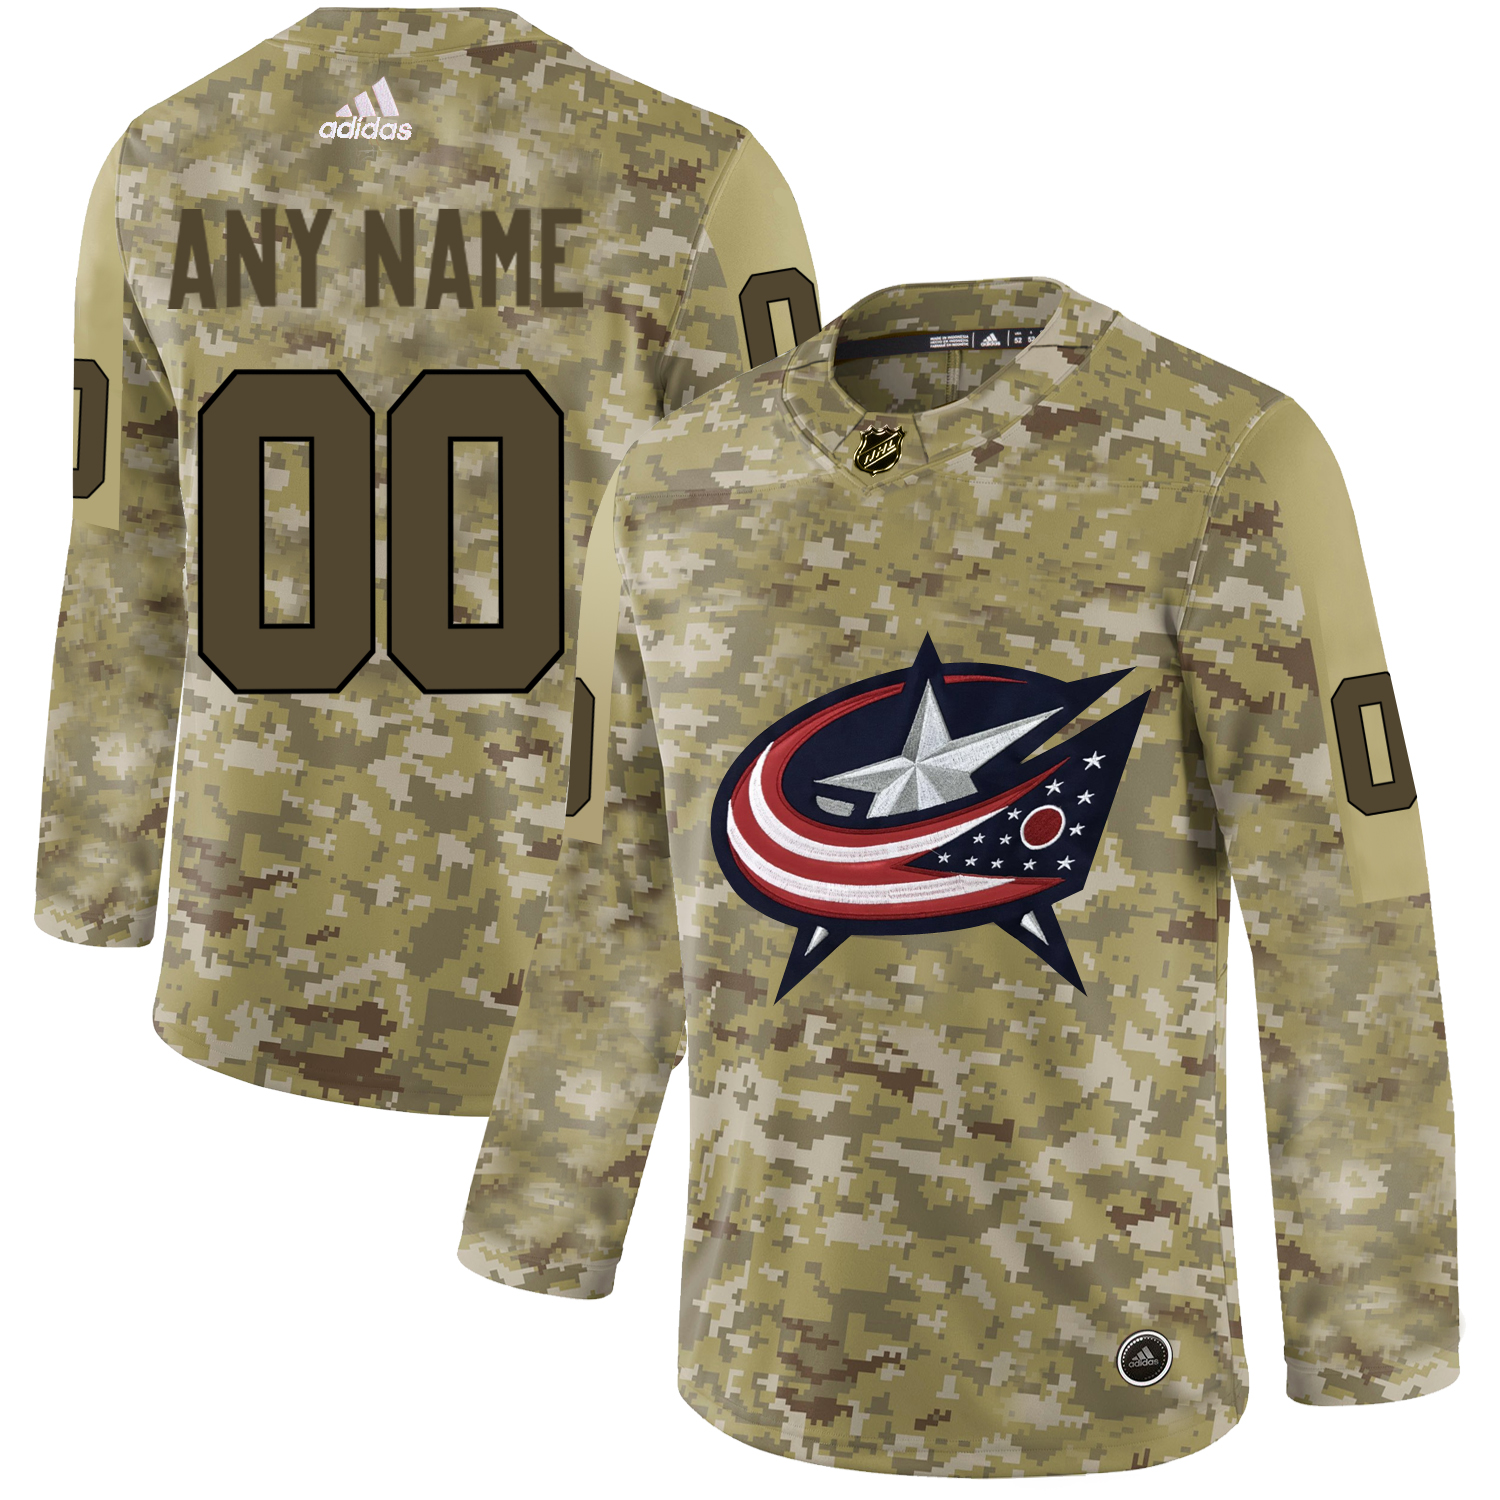 Men's Adidas Blue Jackets Personalized Camo Authentic NHL Jersey